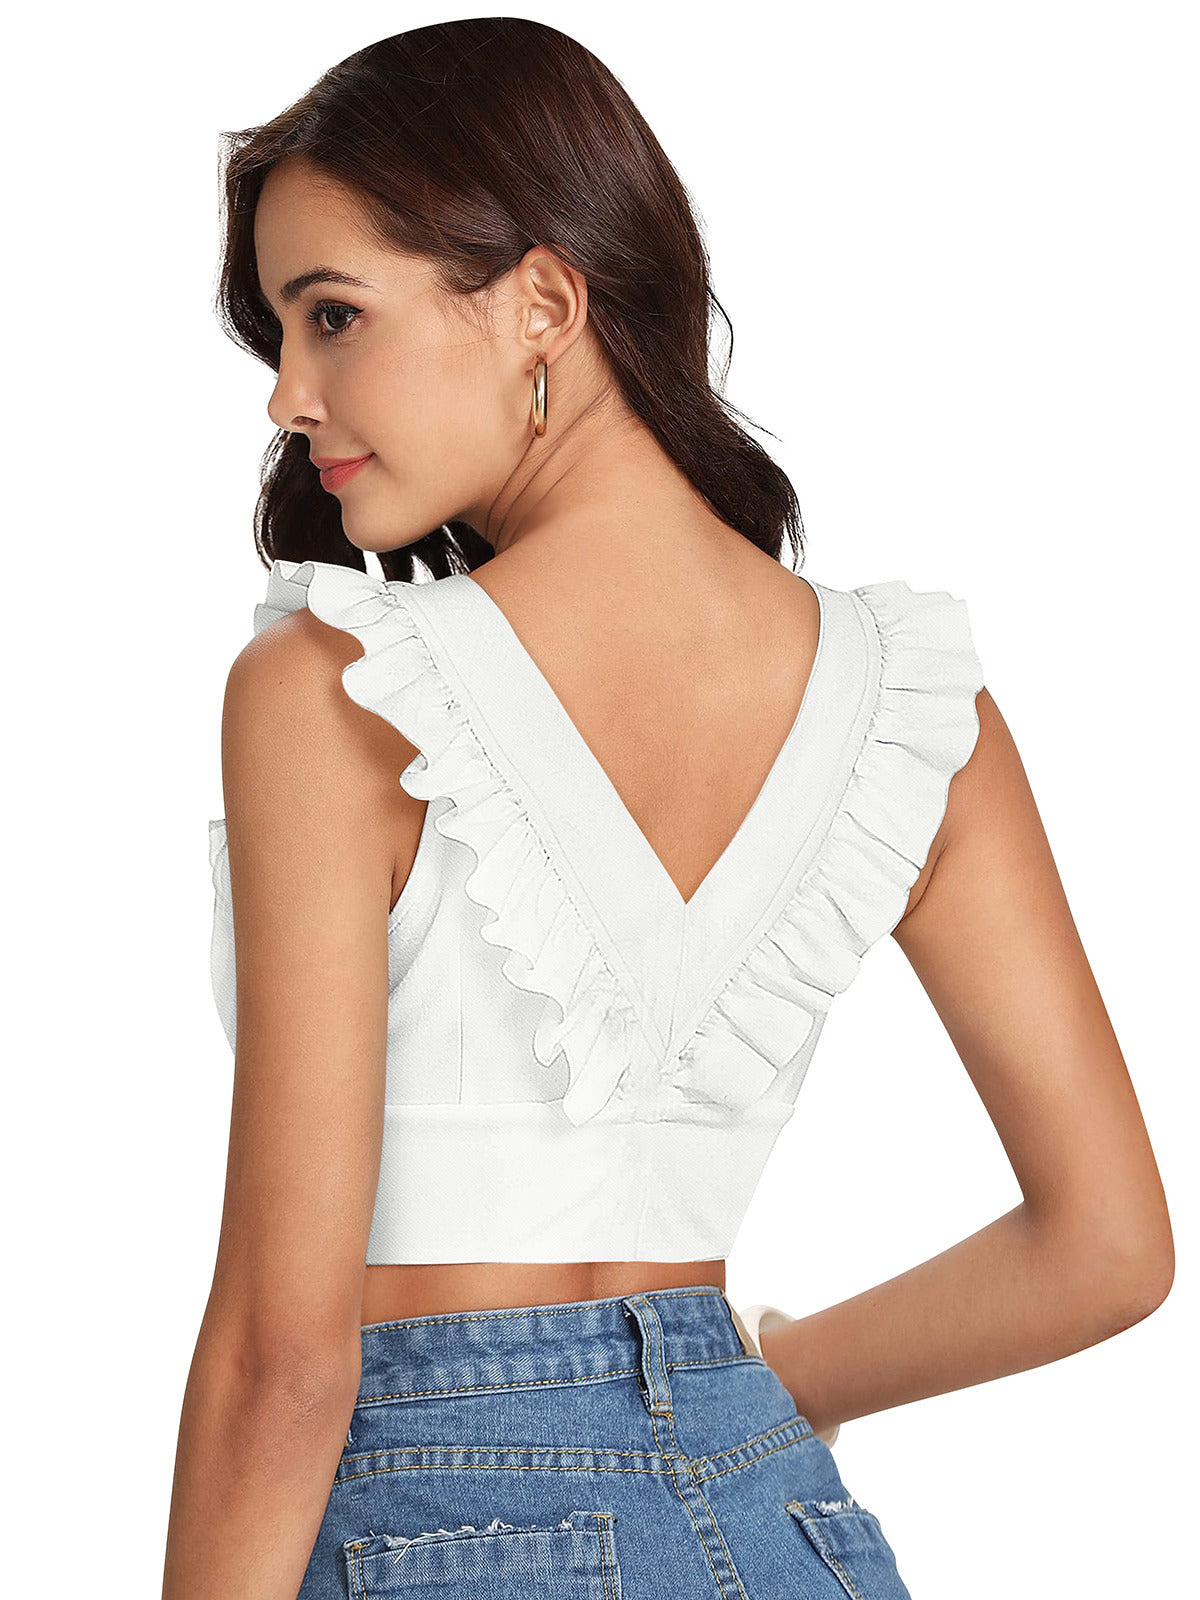 Odette White Knit Fabric Top For Women